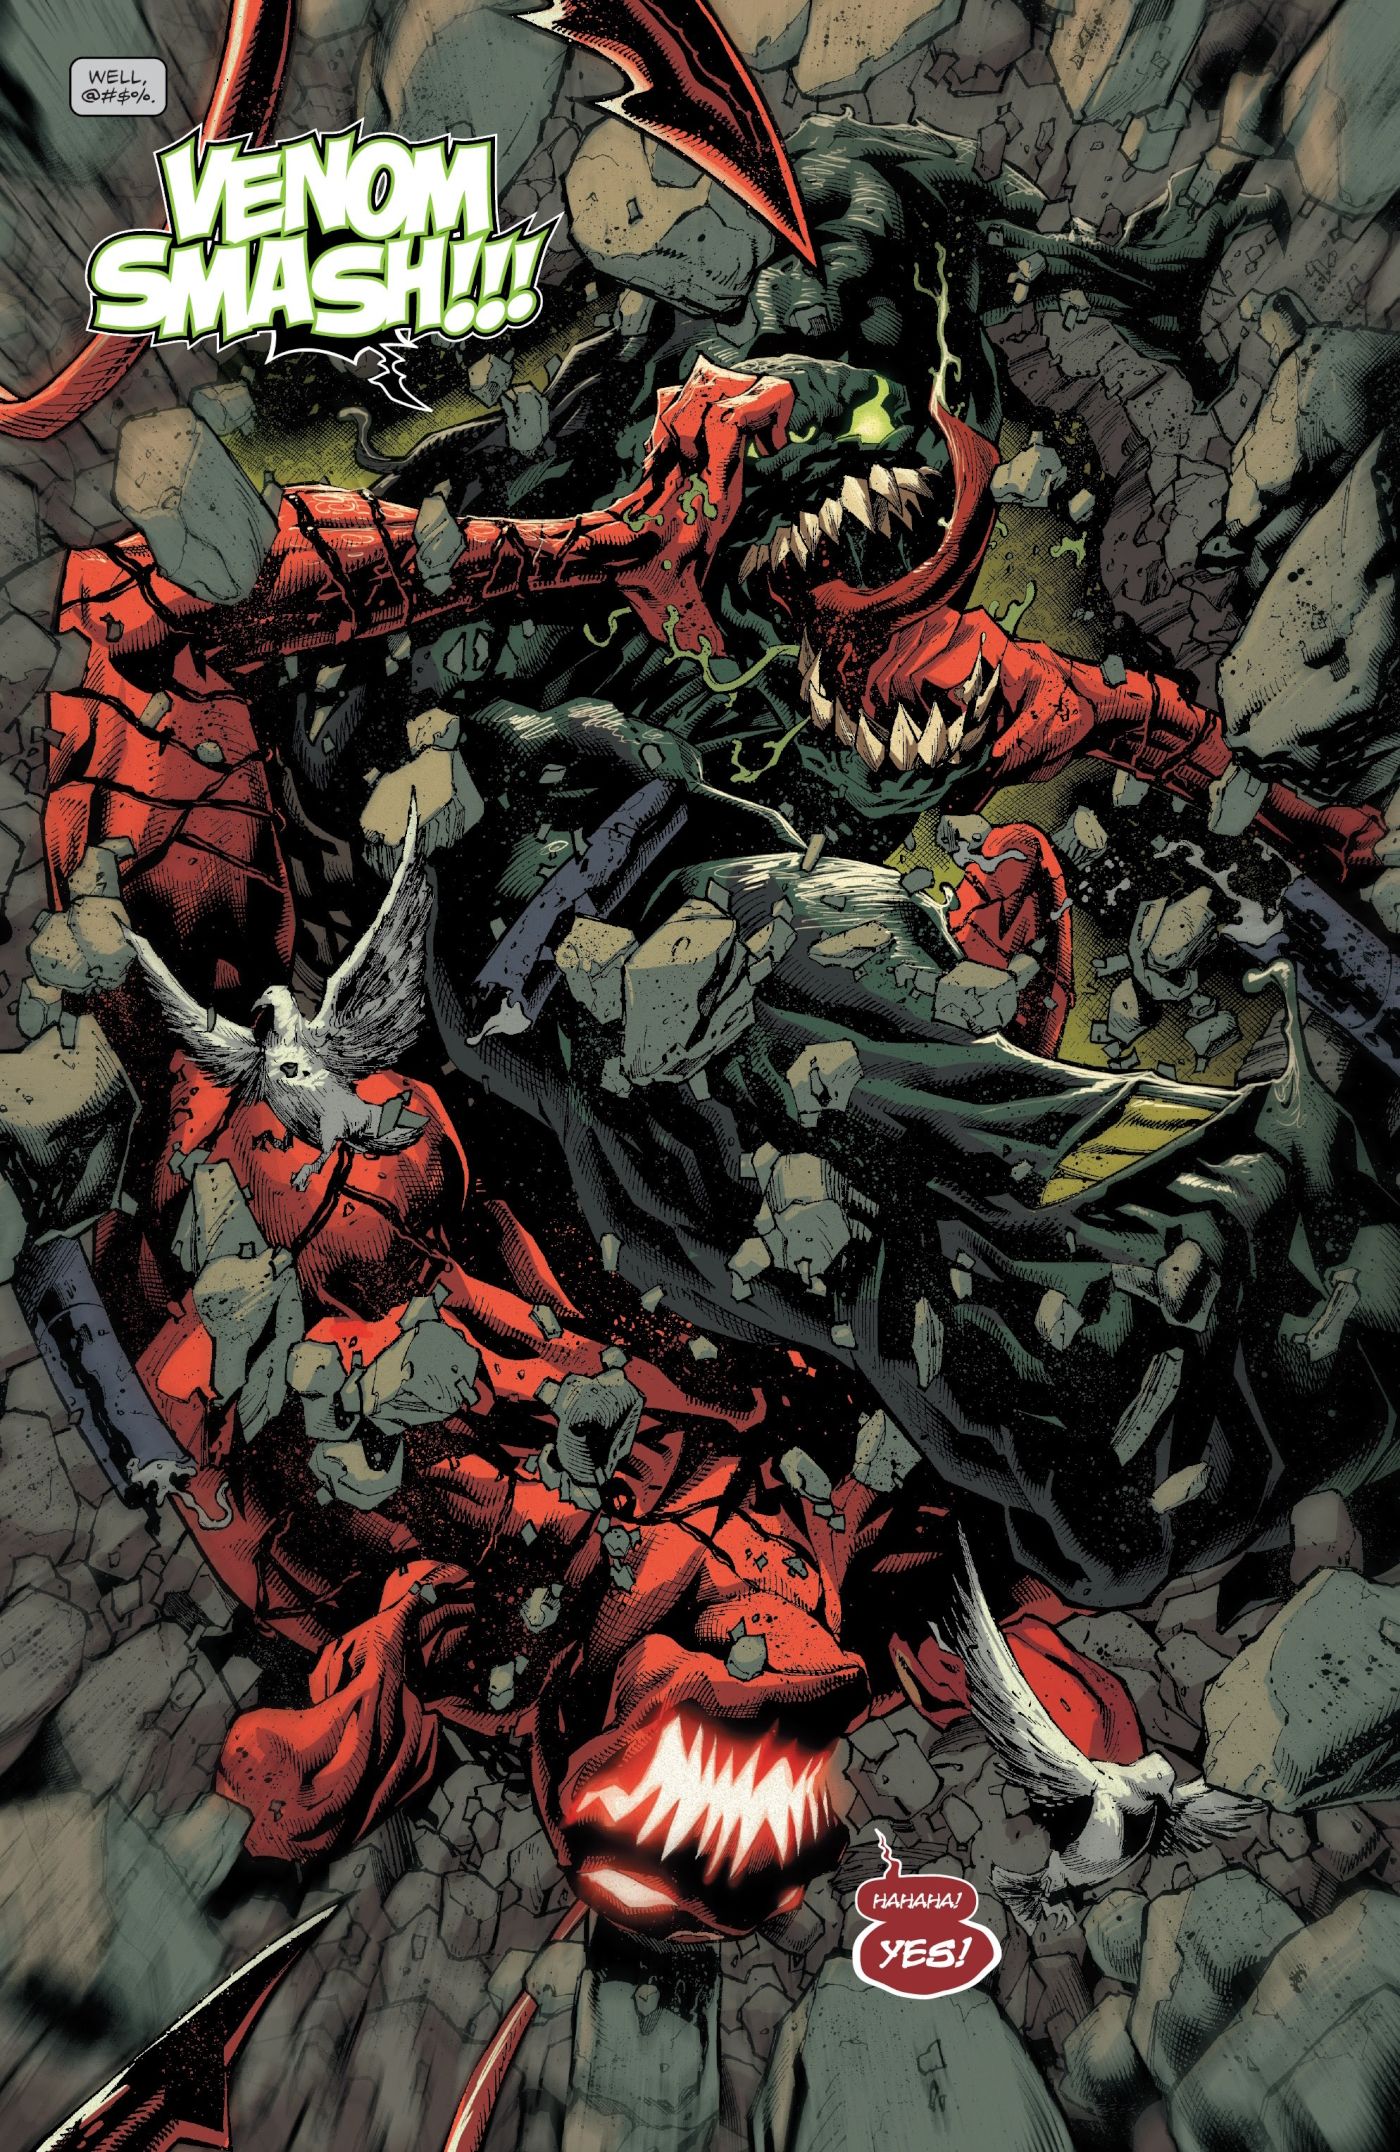 Carnage’s Maximum Strength Is So High, Even Hulk Took a Beating